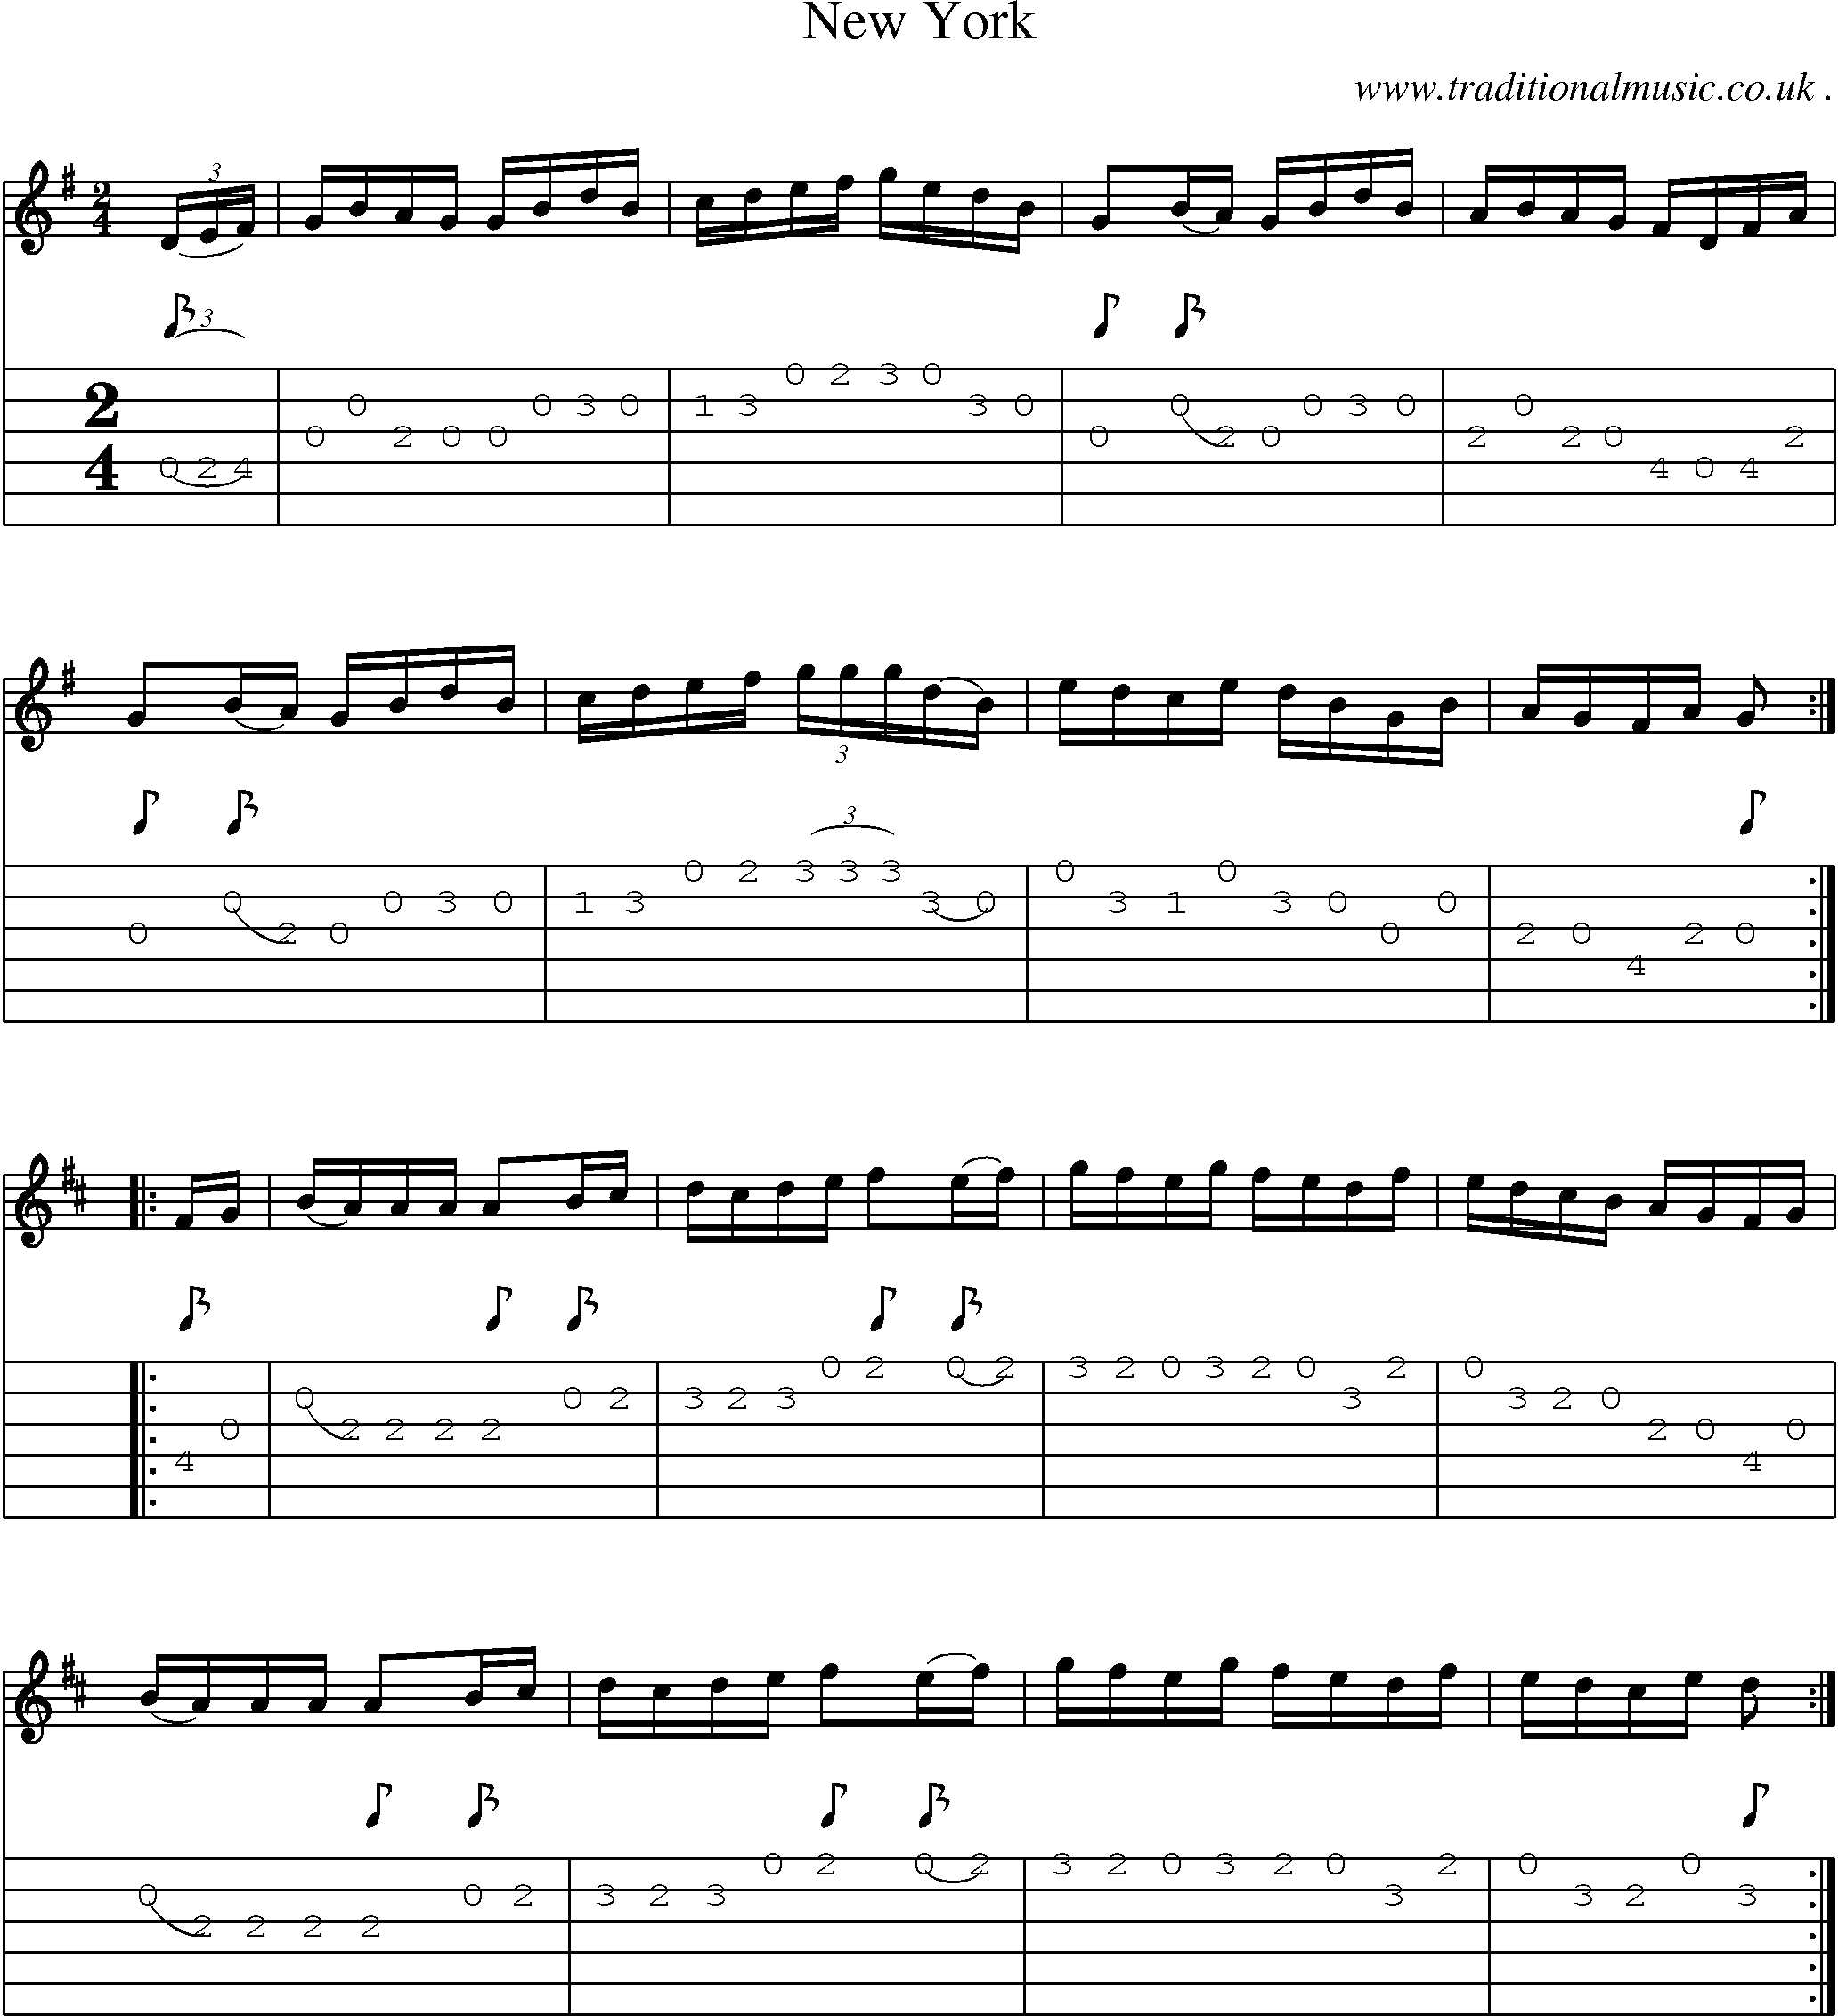 Sheet-Music and Guitar Tabs for New York